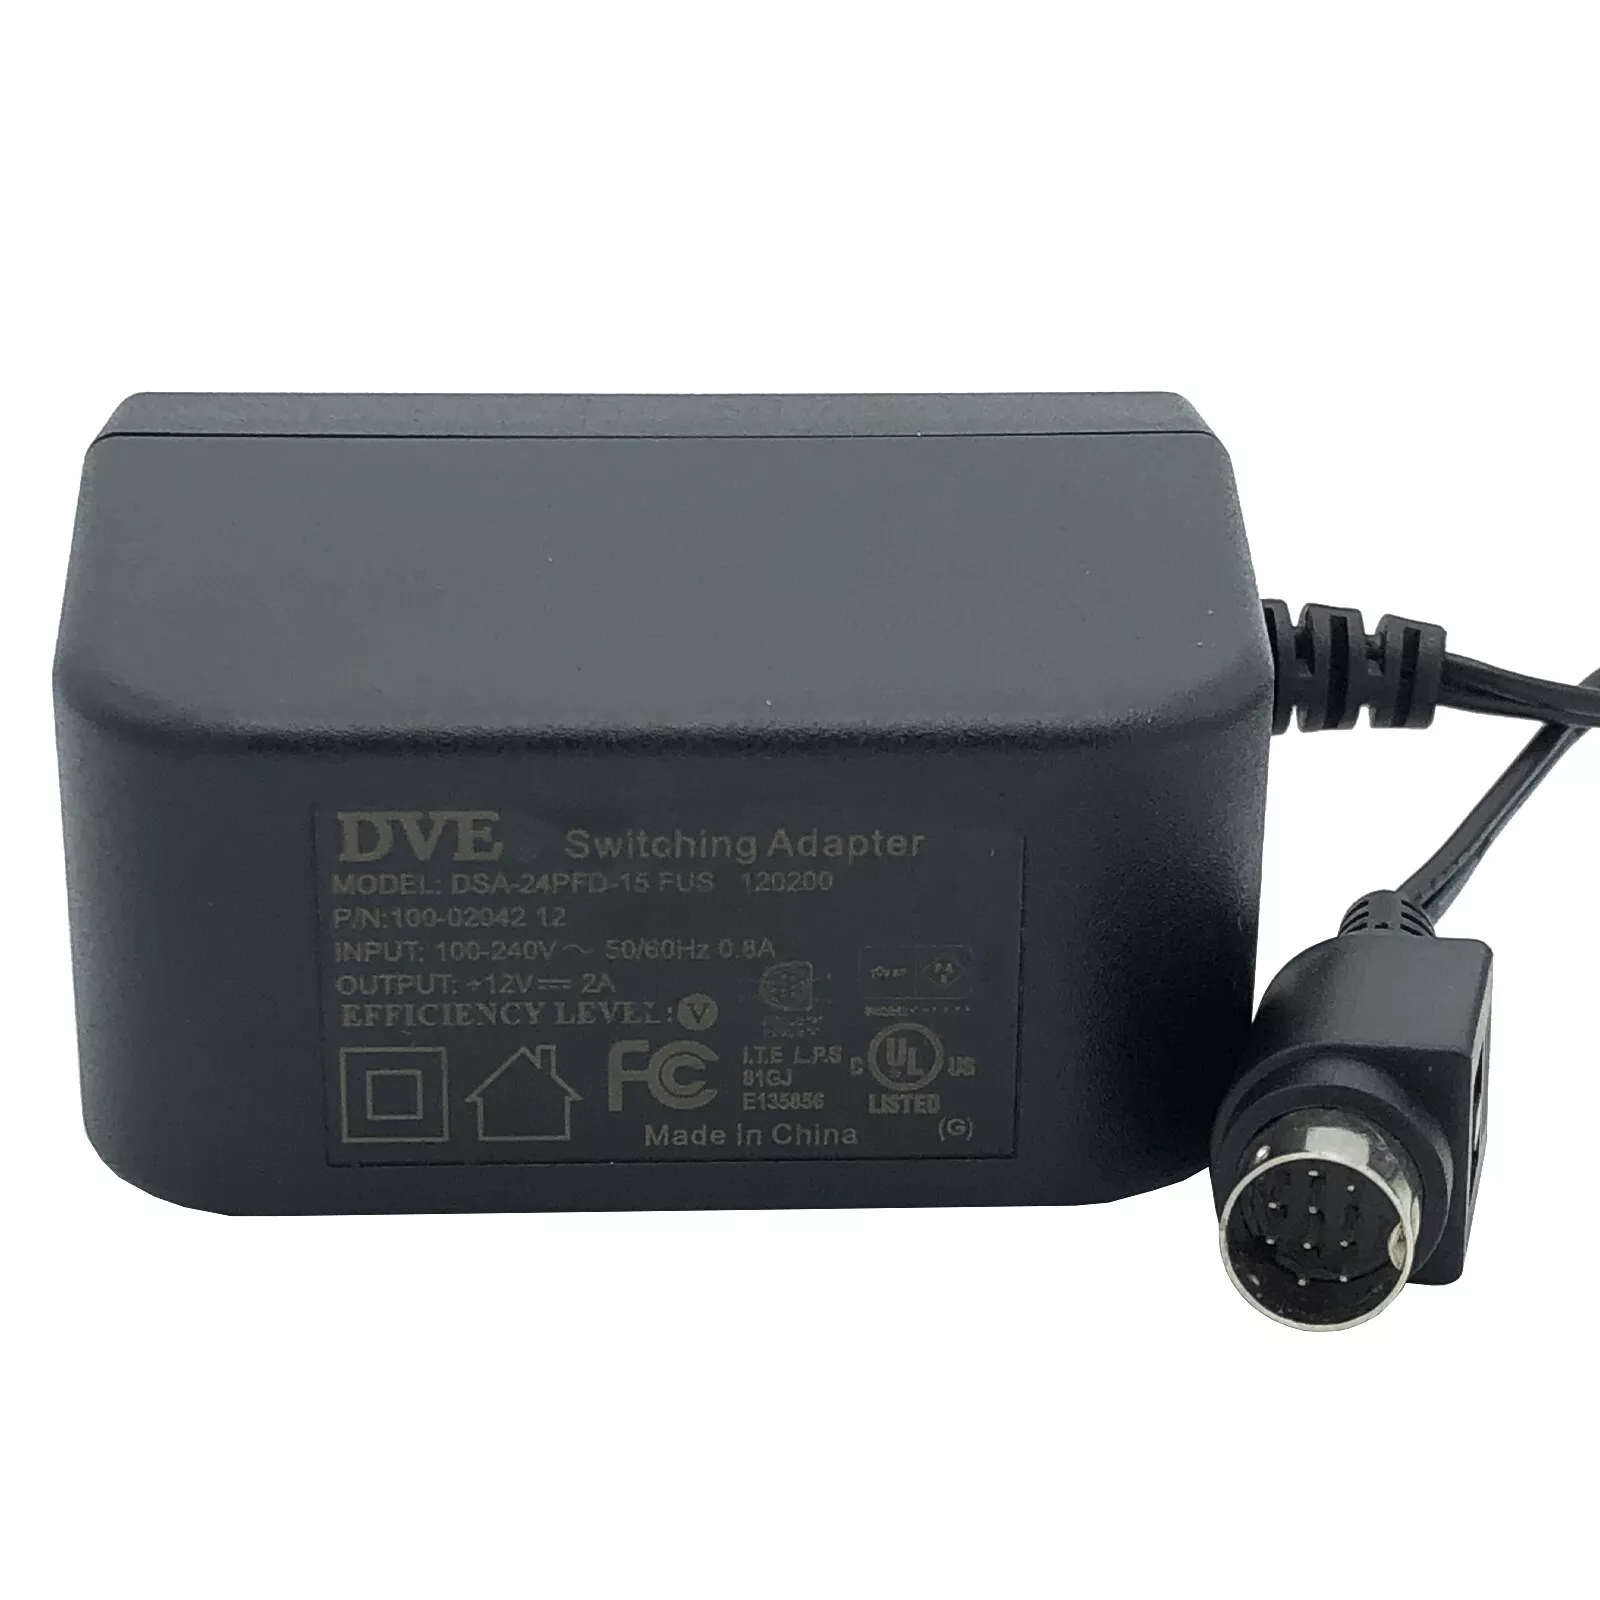 *Brand NEW*Genuine DVE +12V 2A 24W Switching AC Adapter Model DSA-24PFD-15 FUS 120200 Power Supply - Click Image to Close